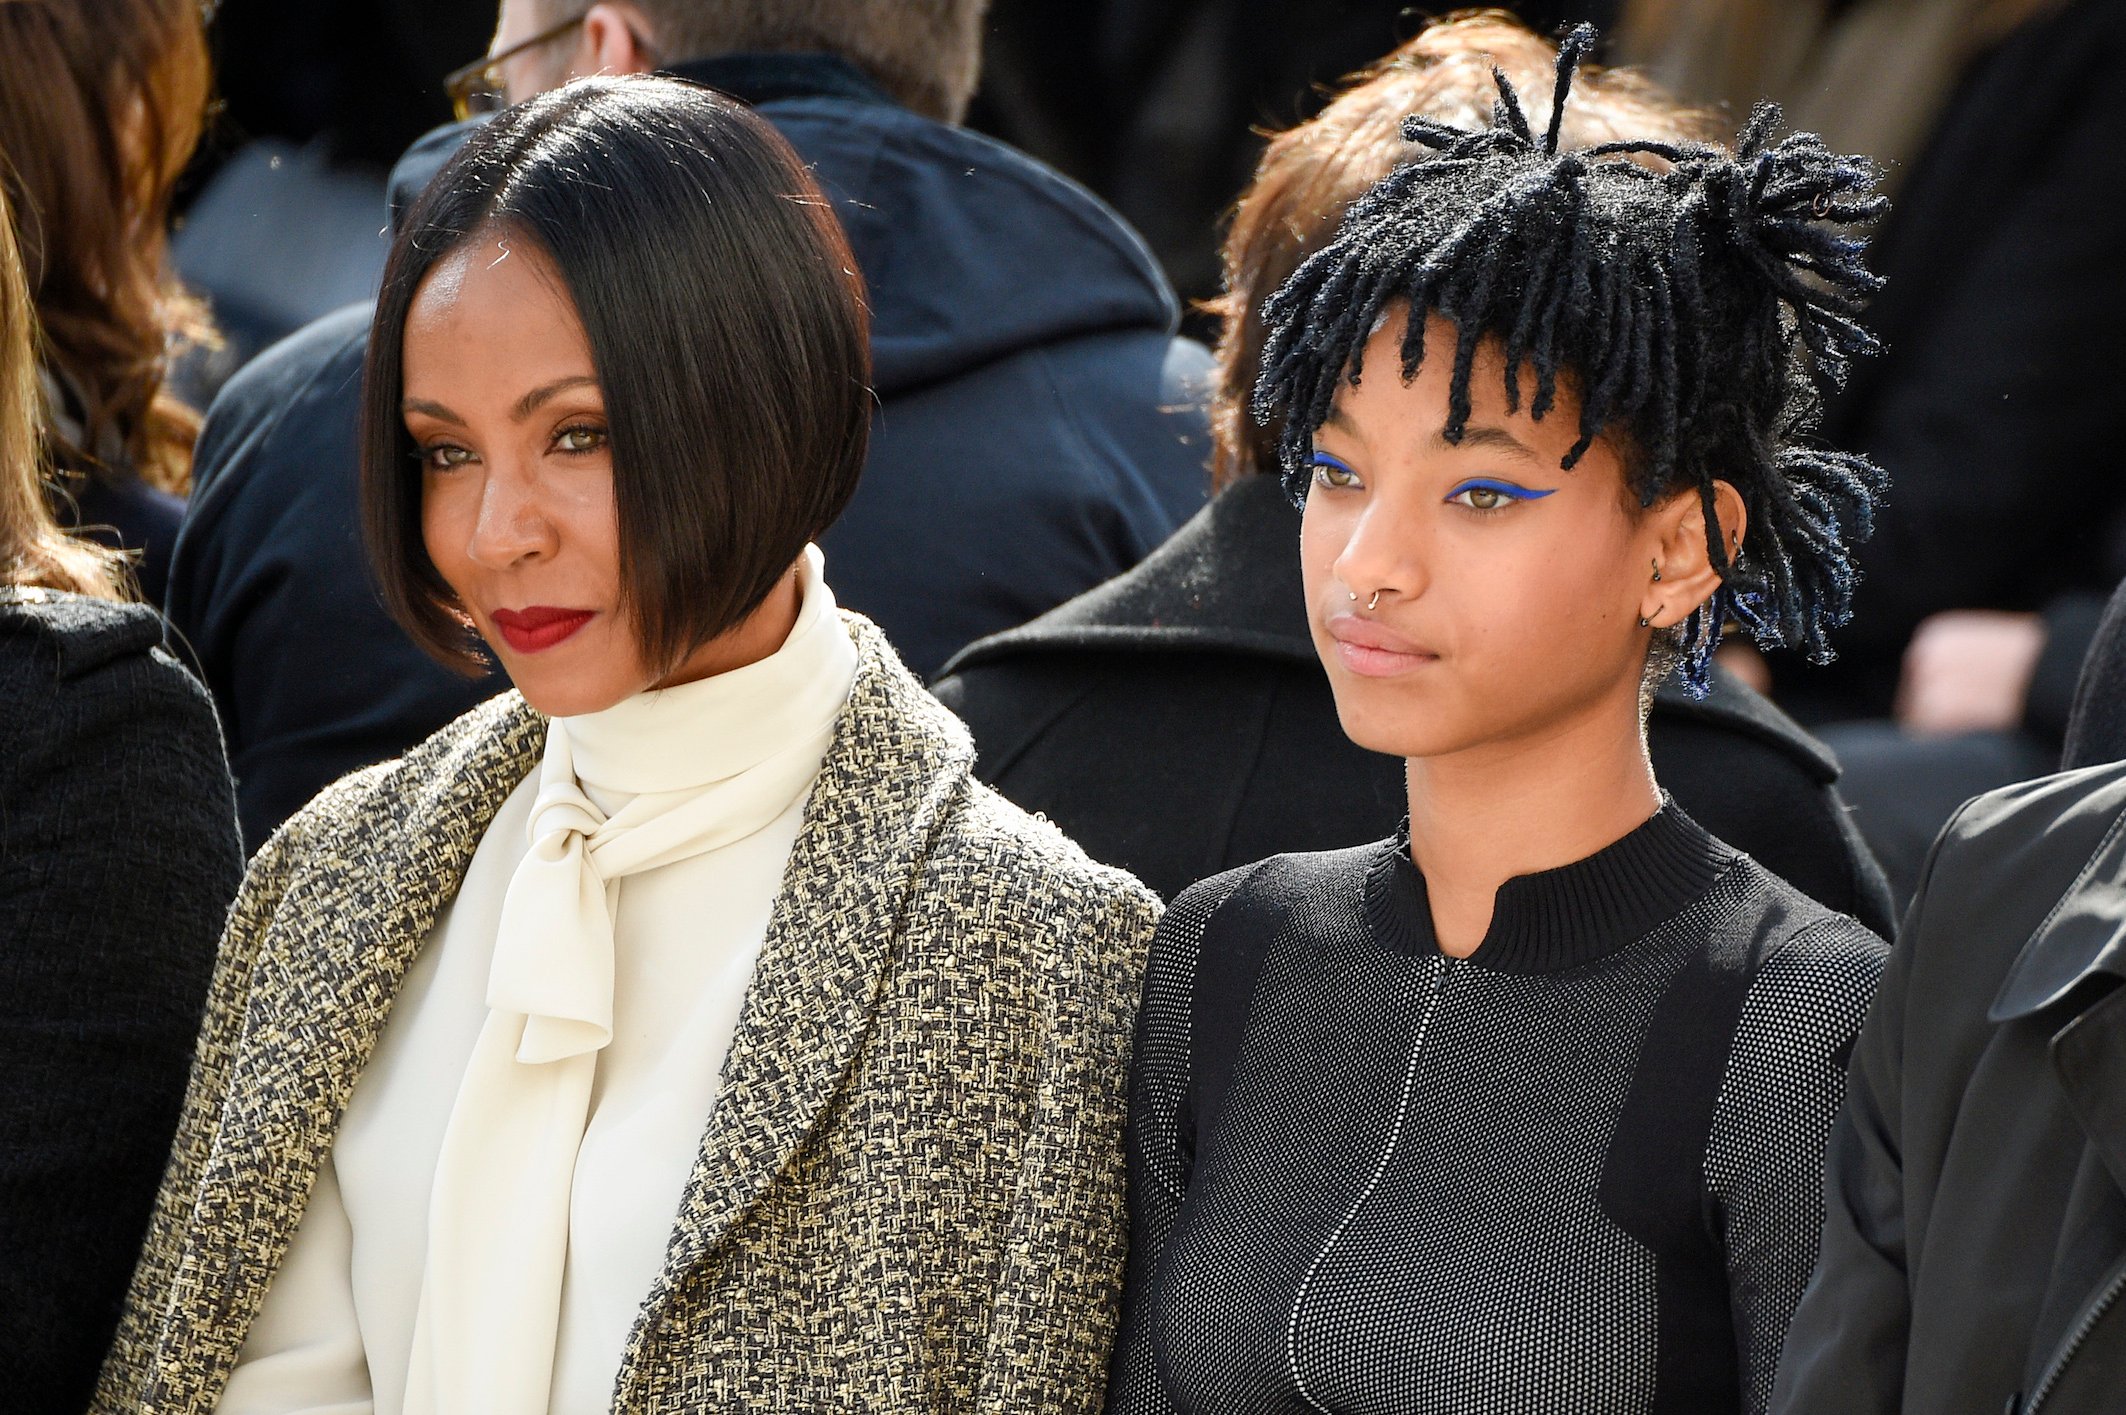 Jada Pinkett Smith and Willow Smith attend the Chanel show